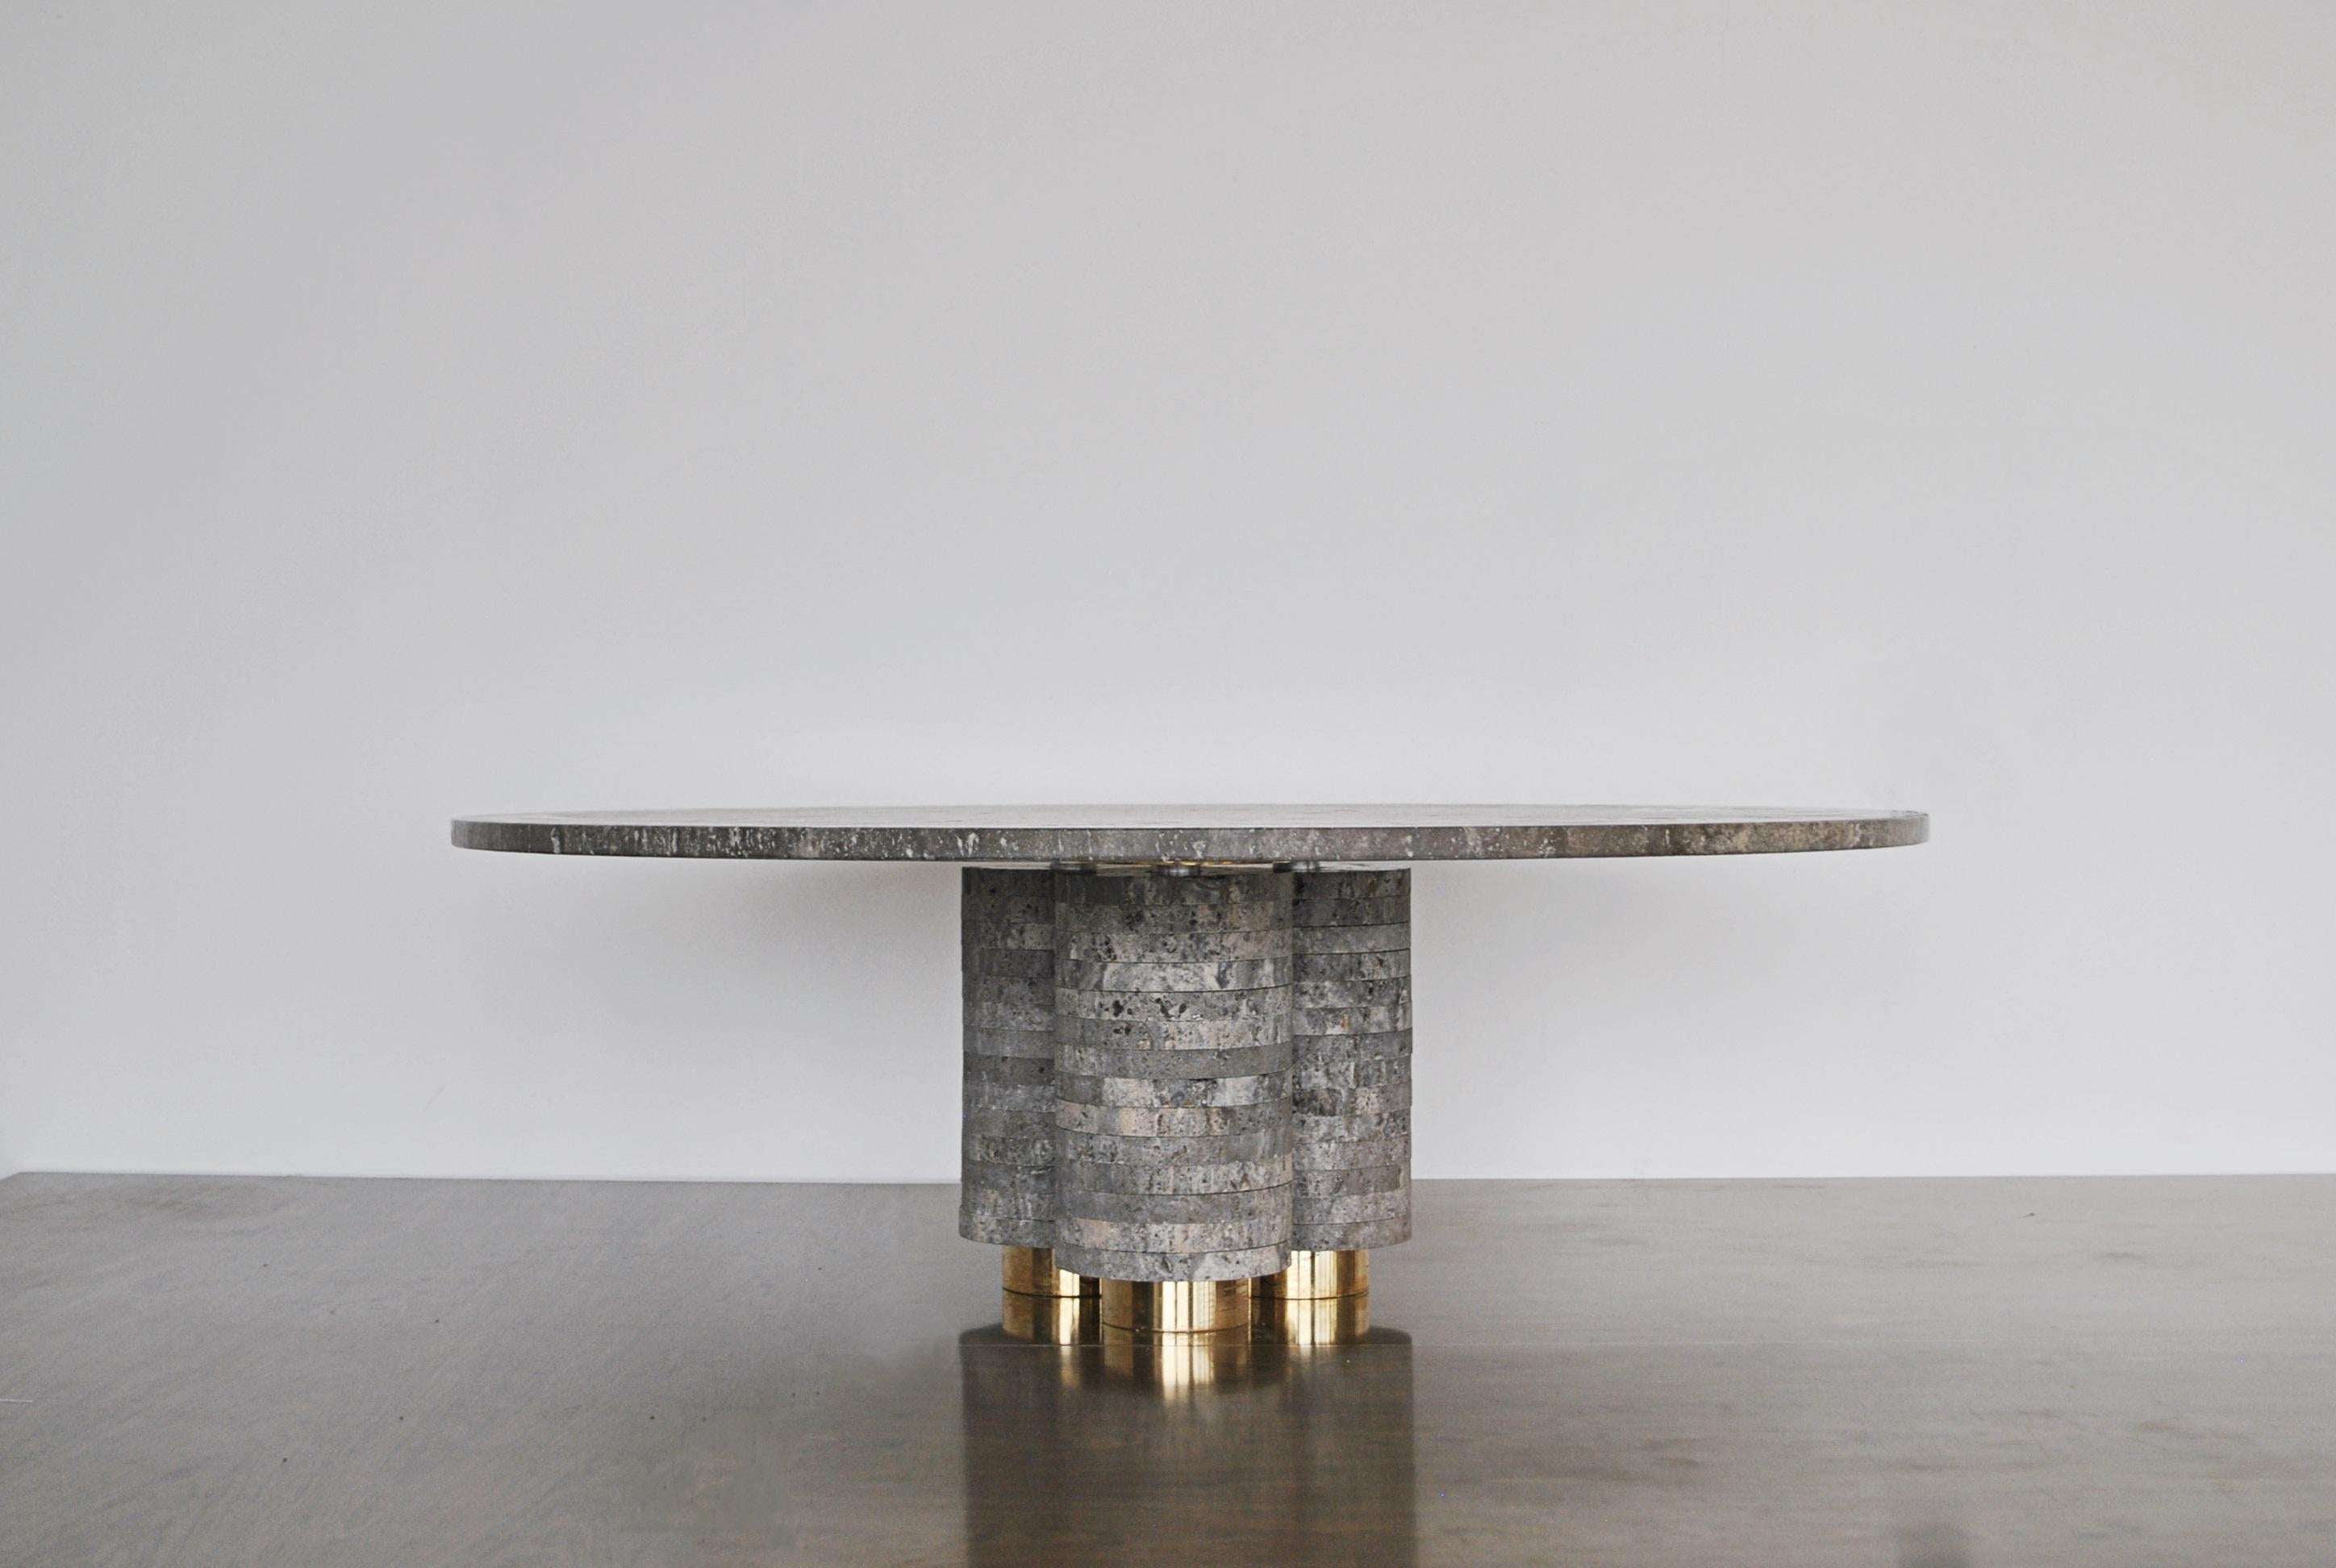 Aro travertine coffee table by Atra Design
Dimensions: D 100 x H 35 cm
Materials: Travertine marble, brass
Other marbles and size available.

Atra Design
We are Atra, a furniture brand produced by Atra form a mexico city–based high end production